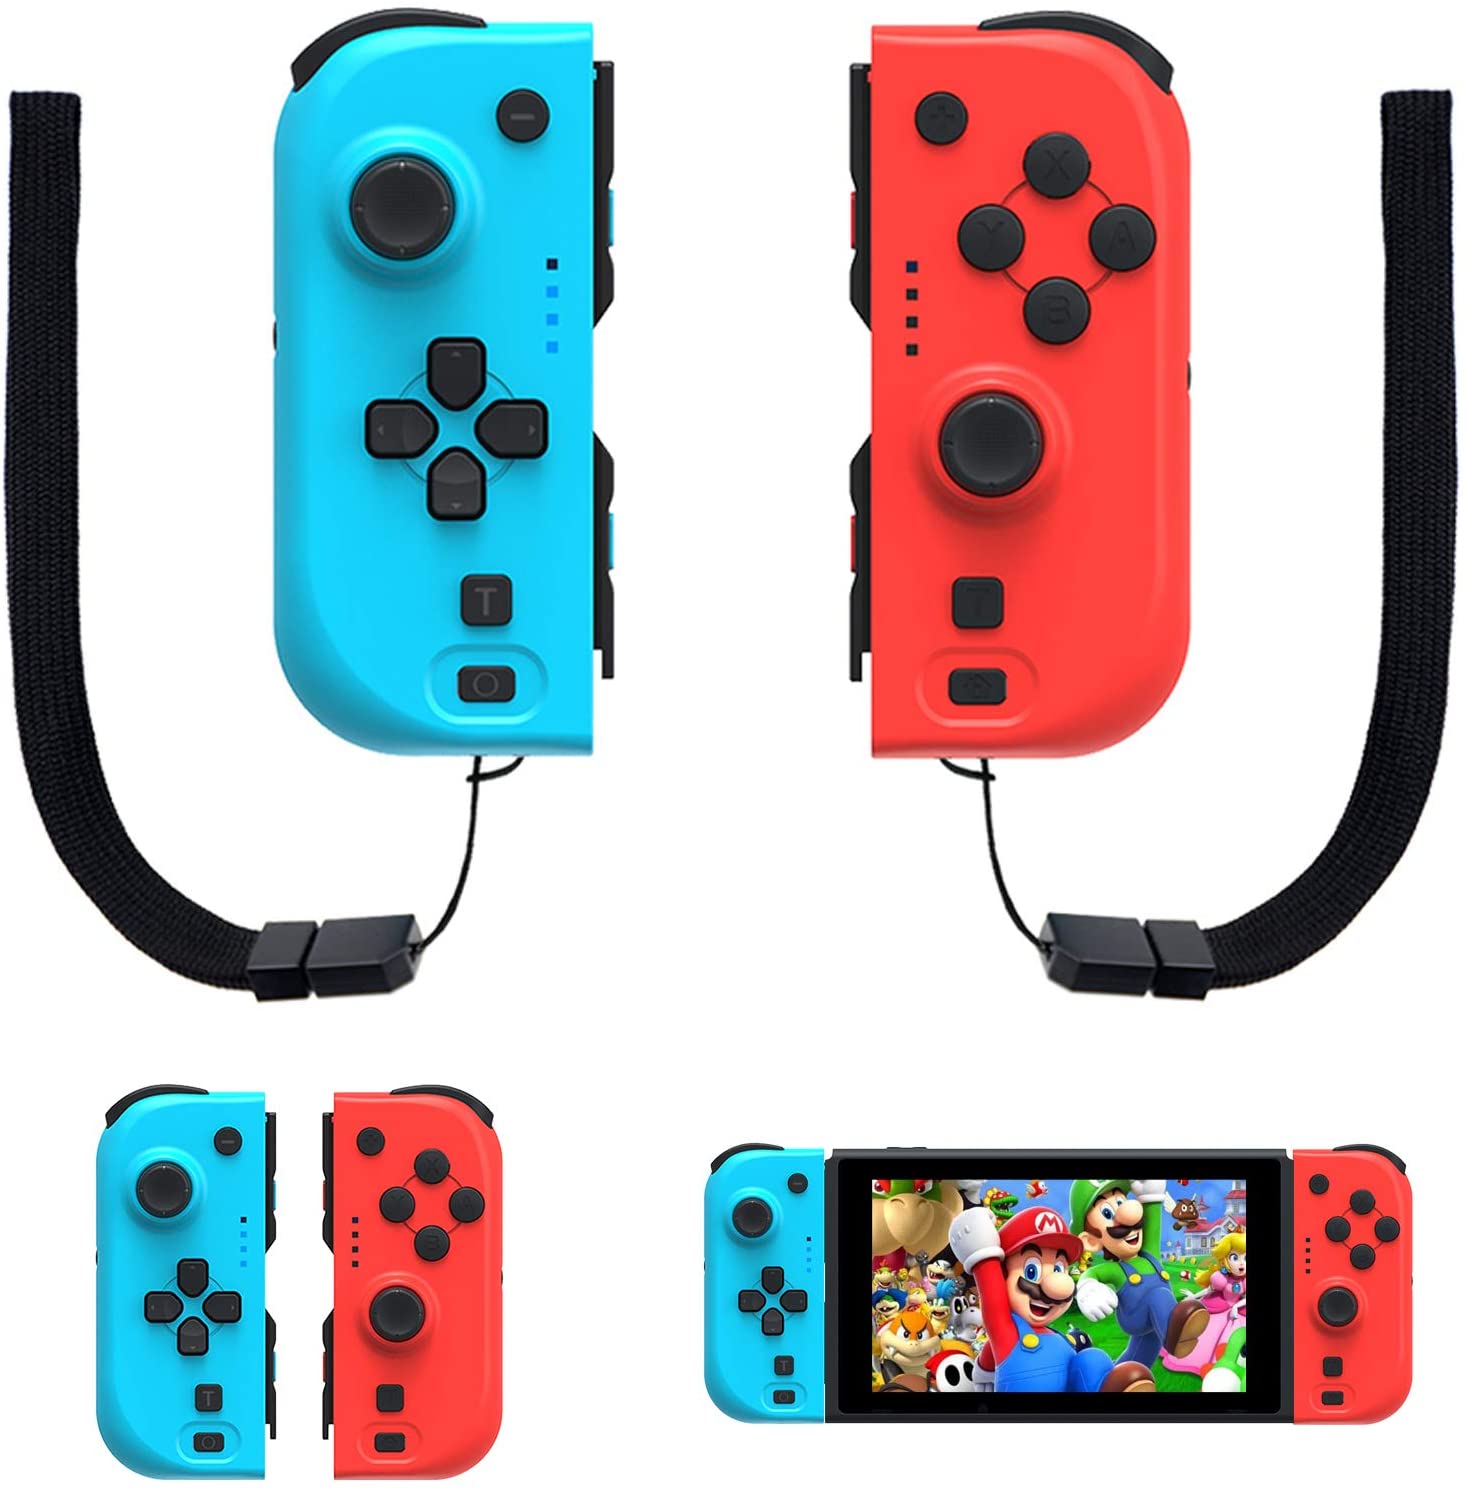 Red and black Switch Joy-Cons come with two straps.